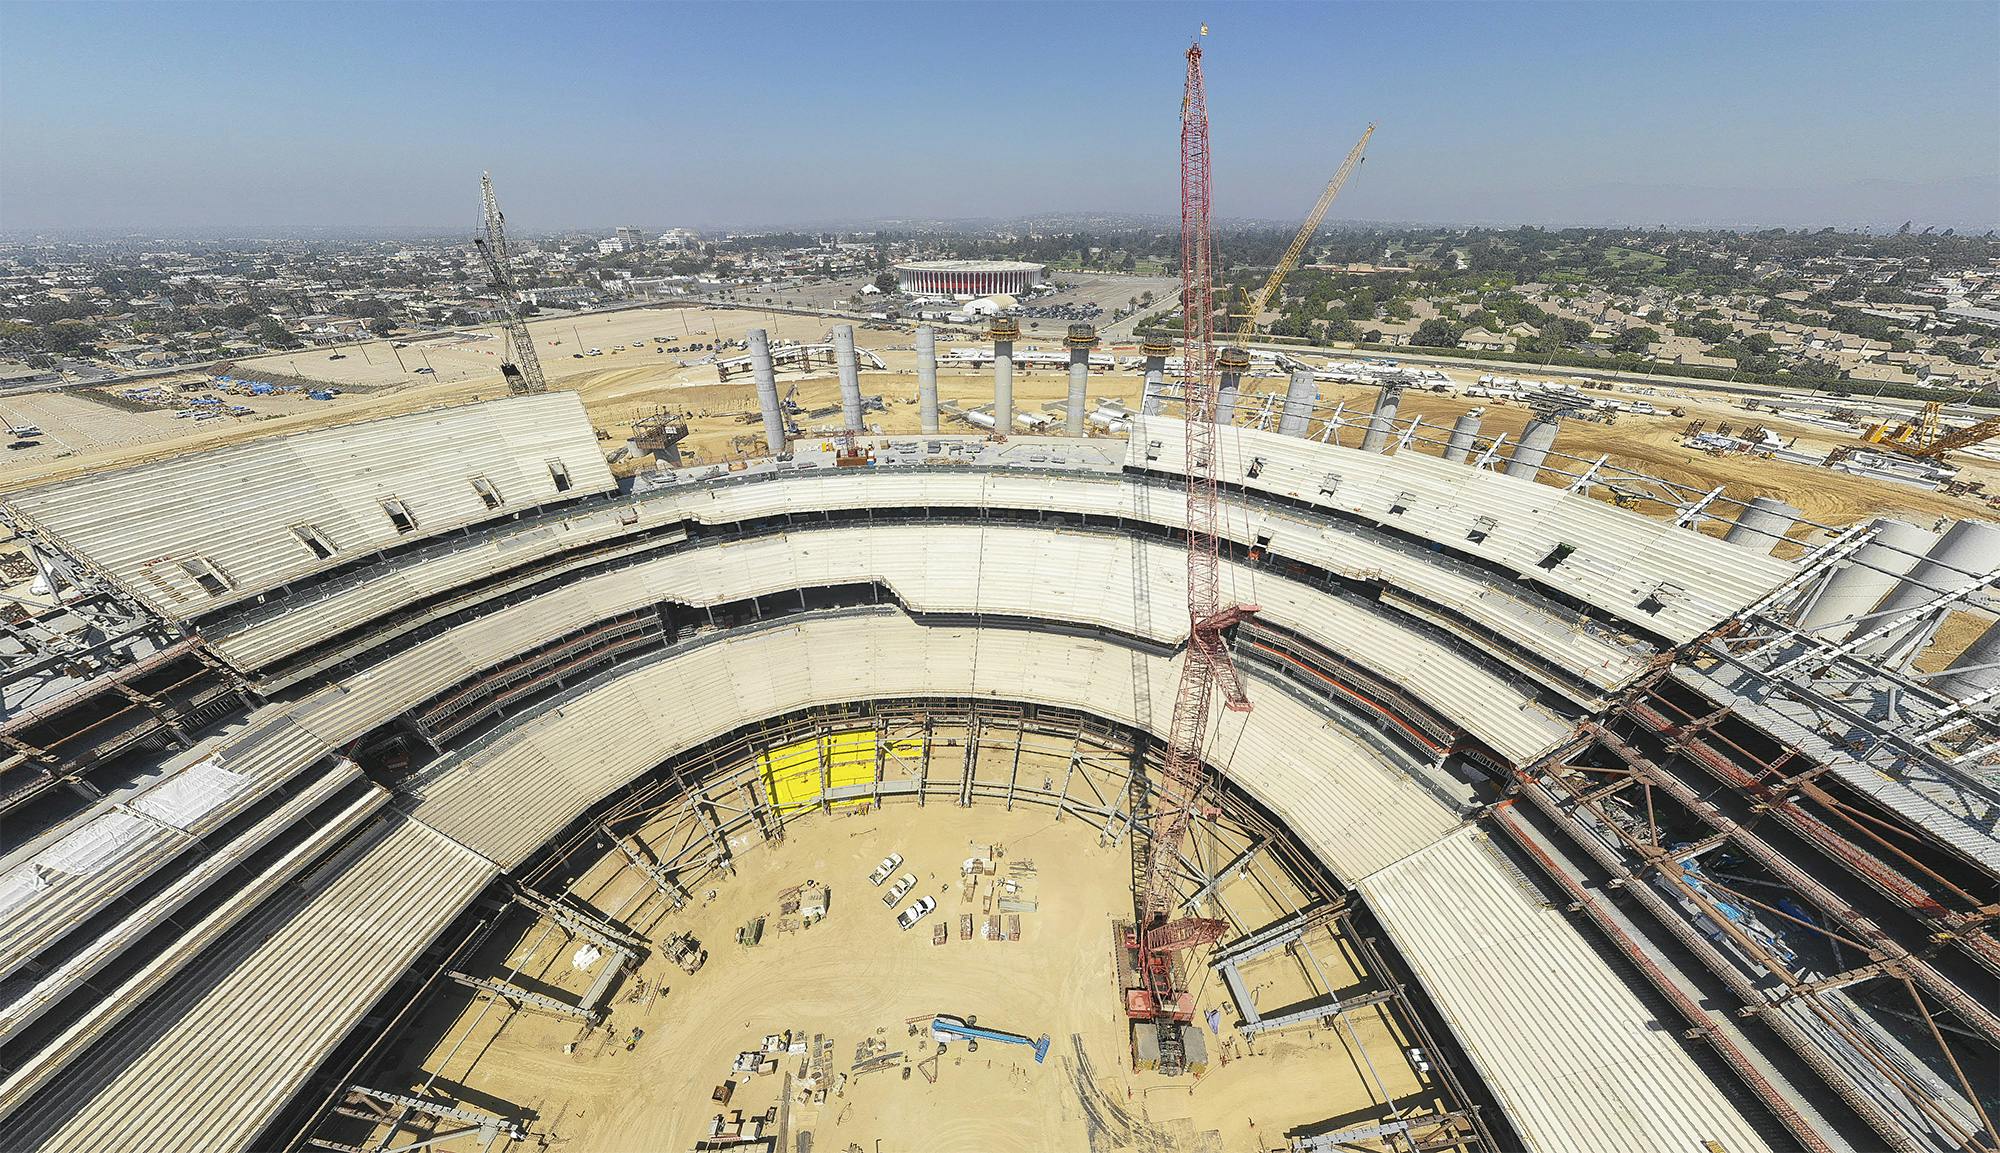 Construction update on L.A.'s new gigantic football stadium | News | Archinect2000 x 1153